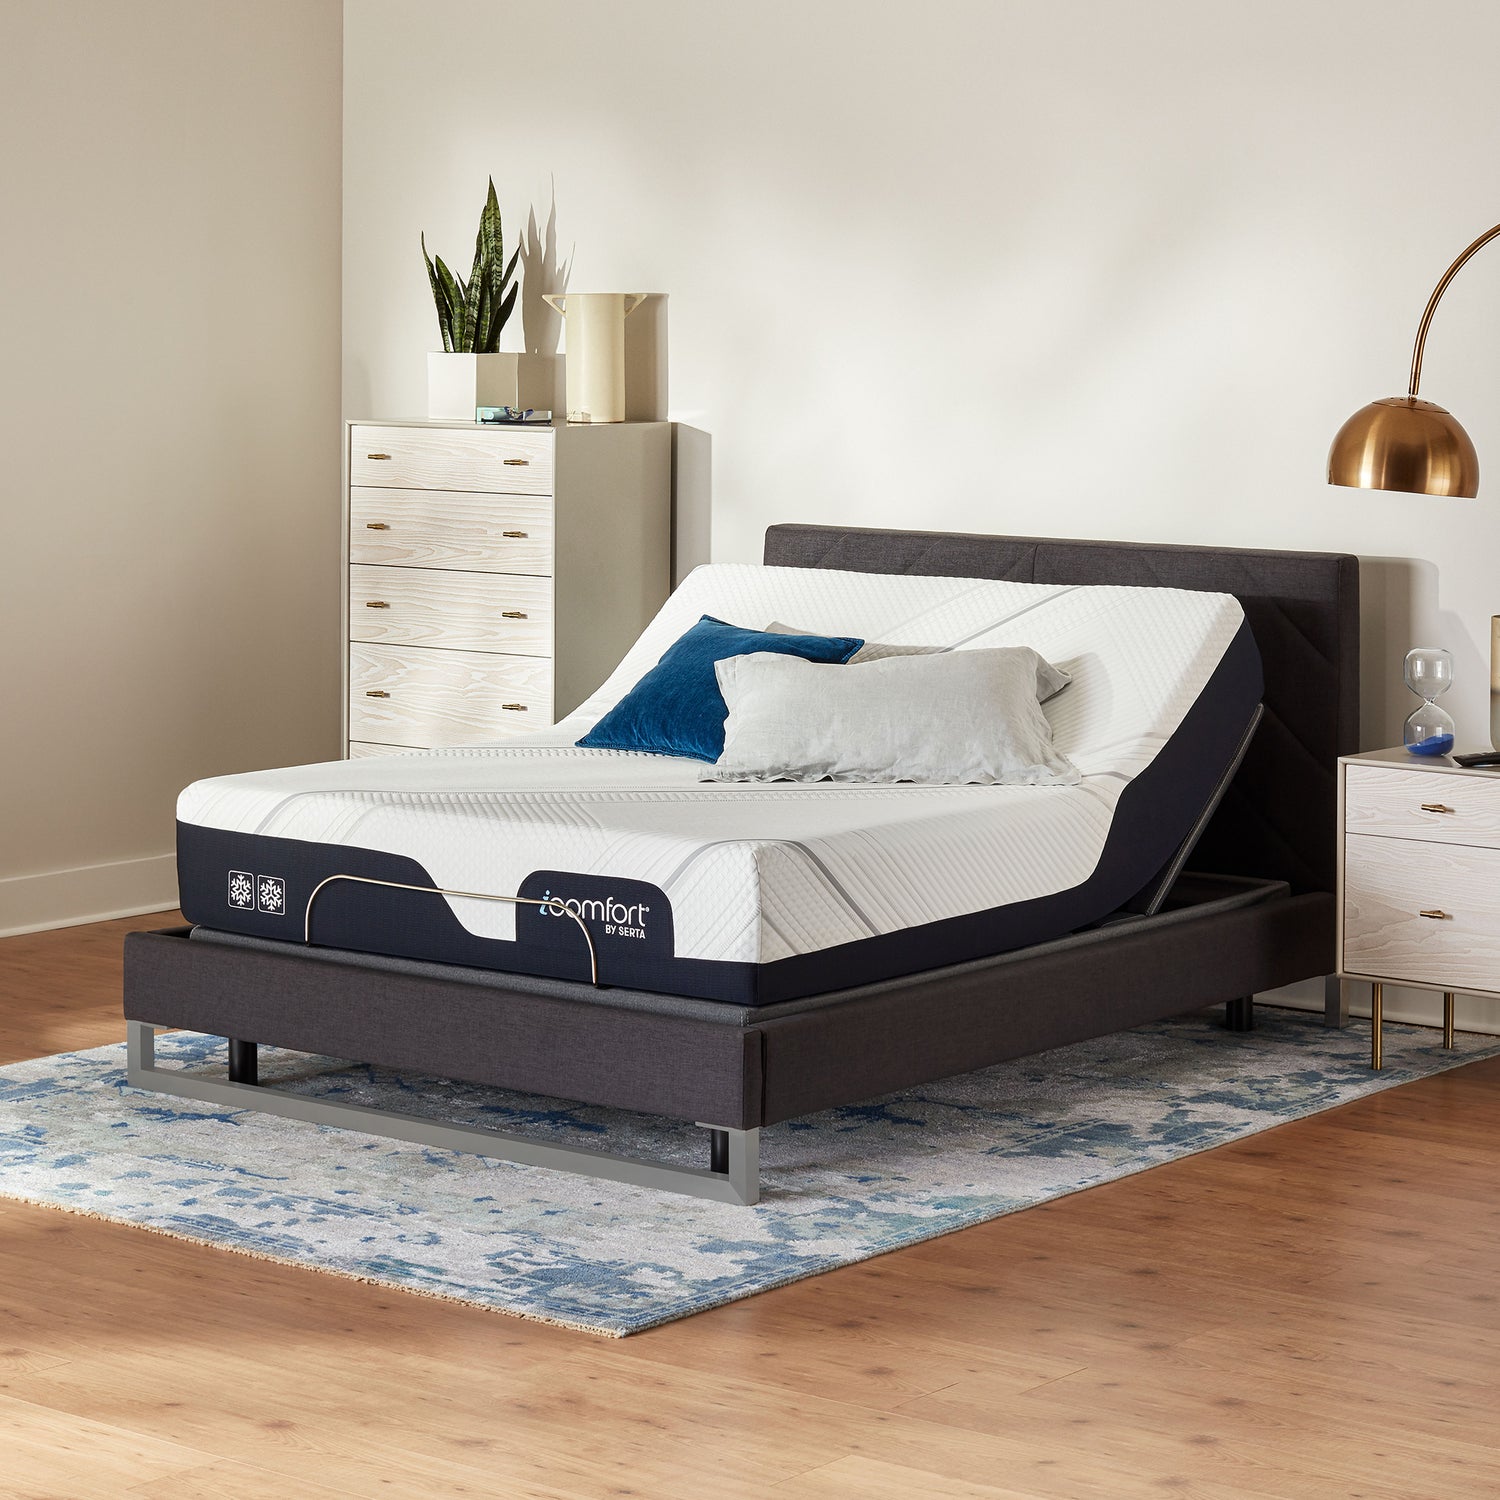 Discover Unmatched Comfort with Adjustable Bases